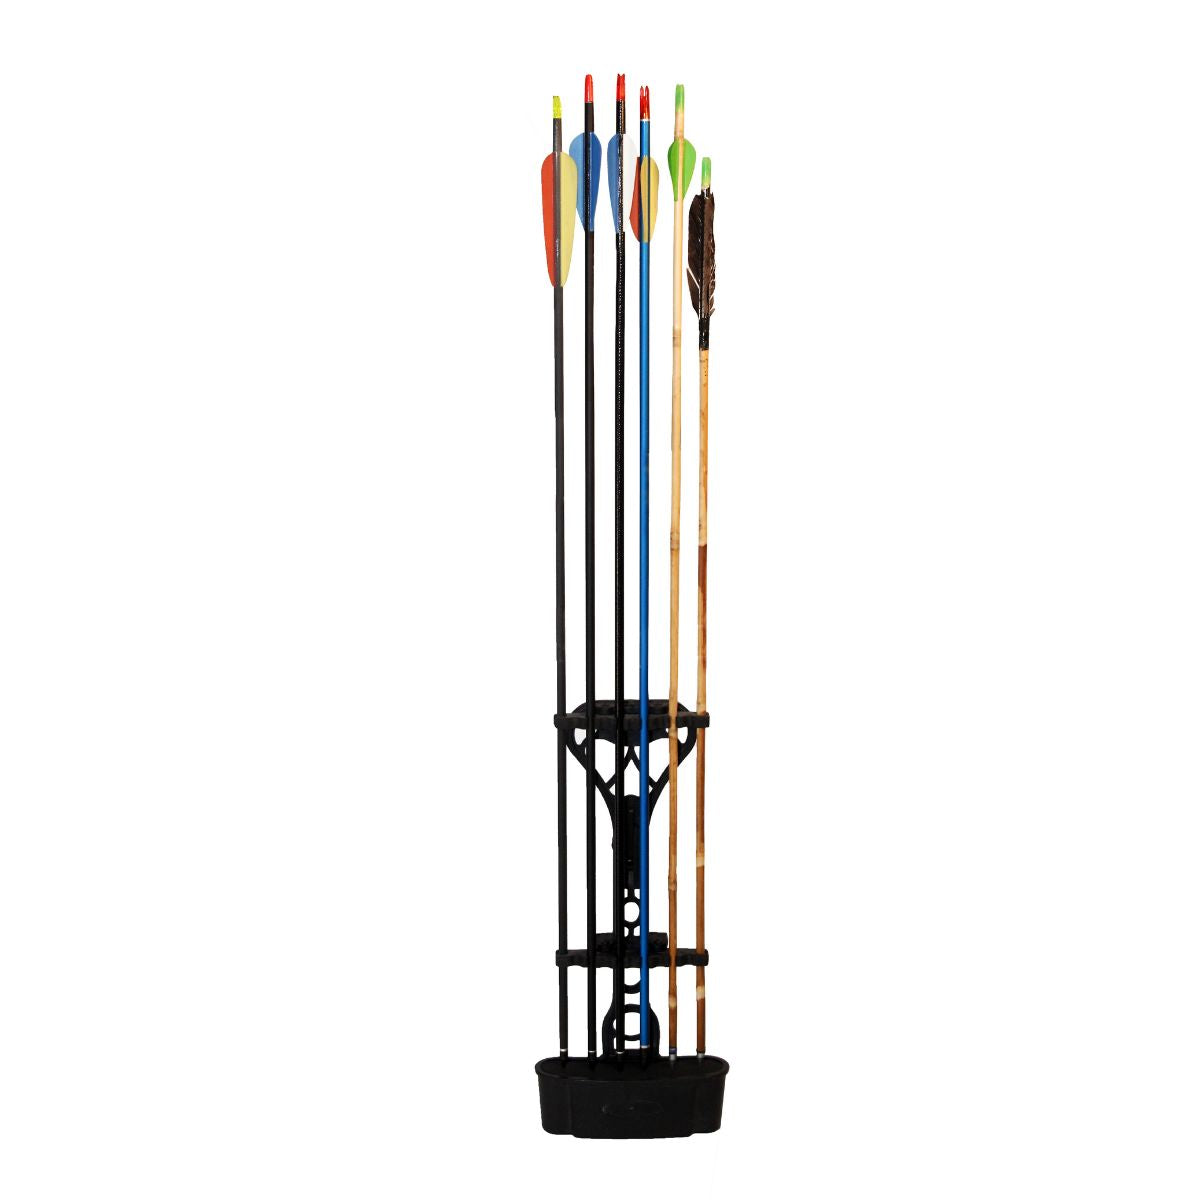 Embedded Quiver - AEQ01 - Archery Equipment 4